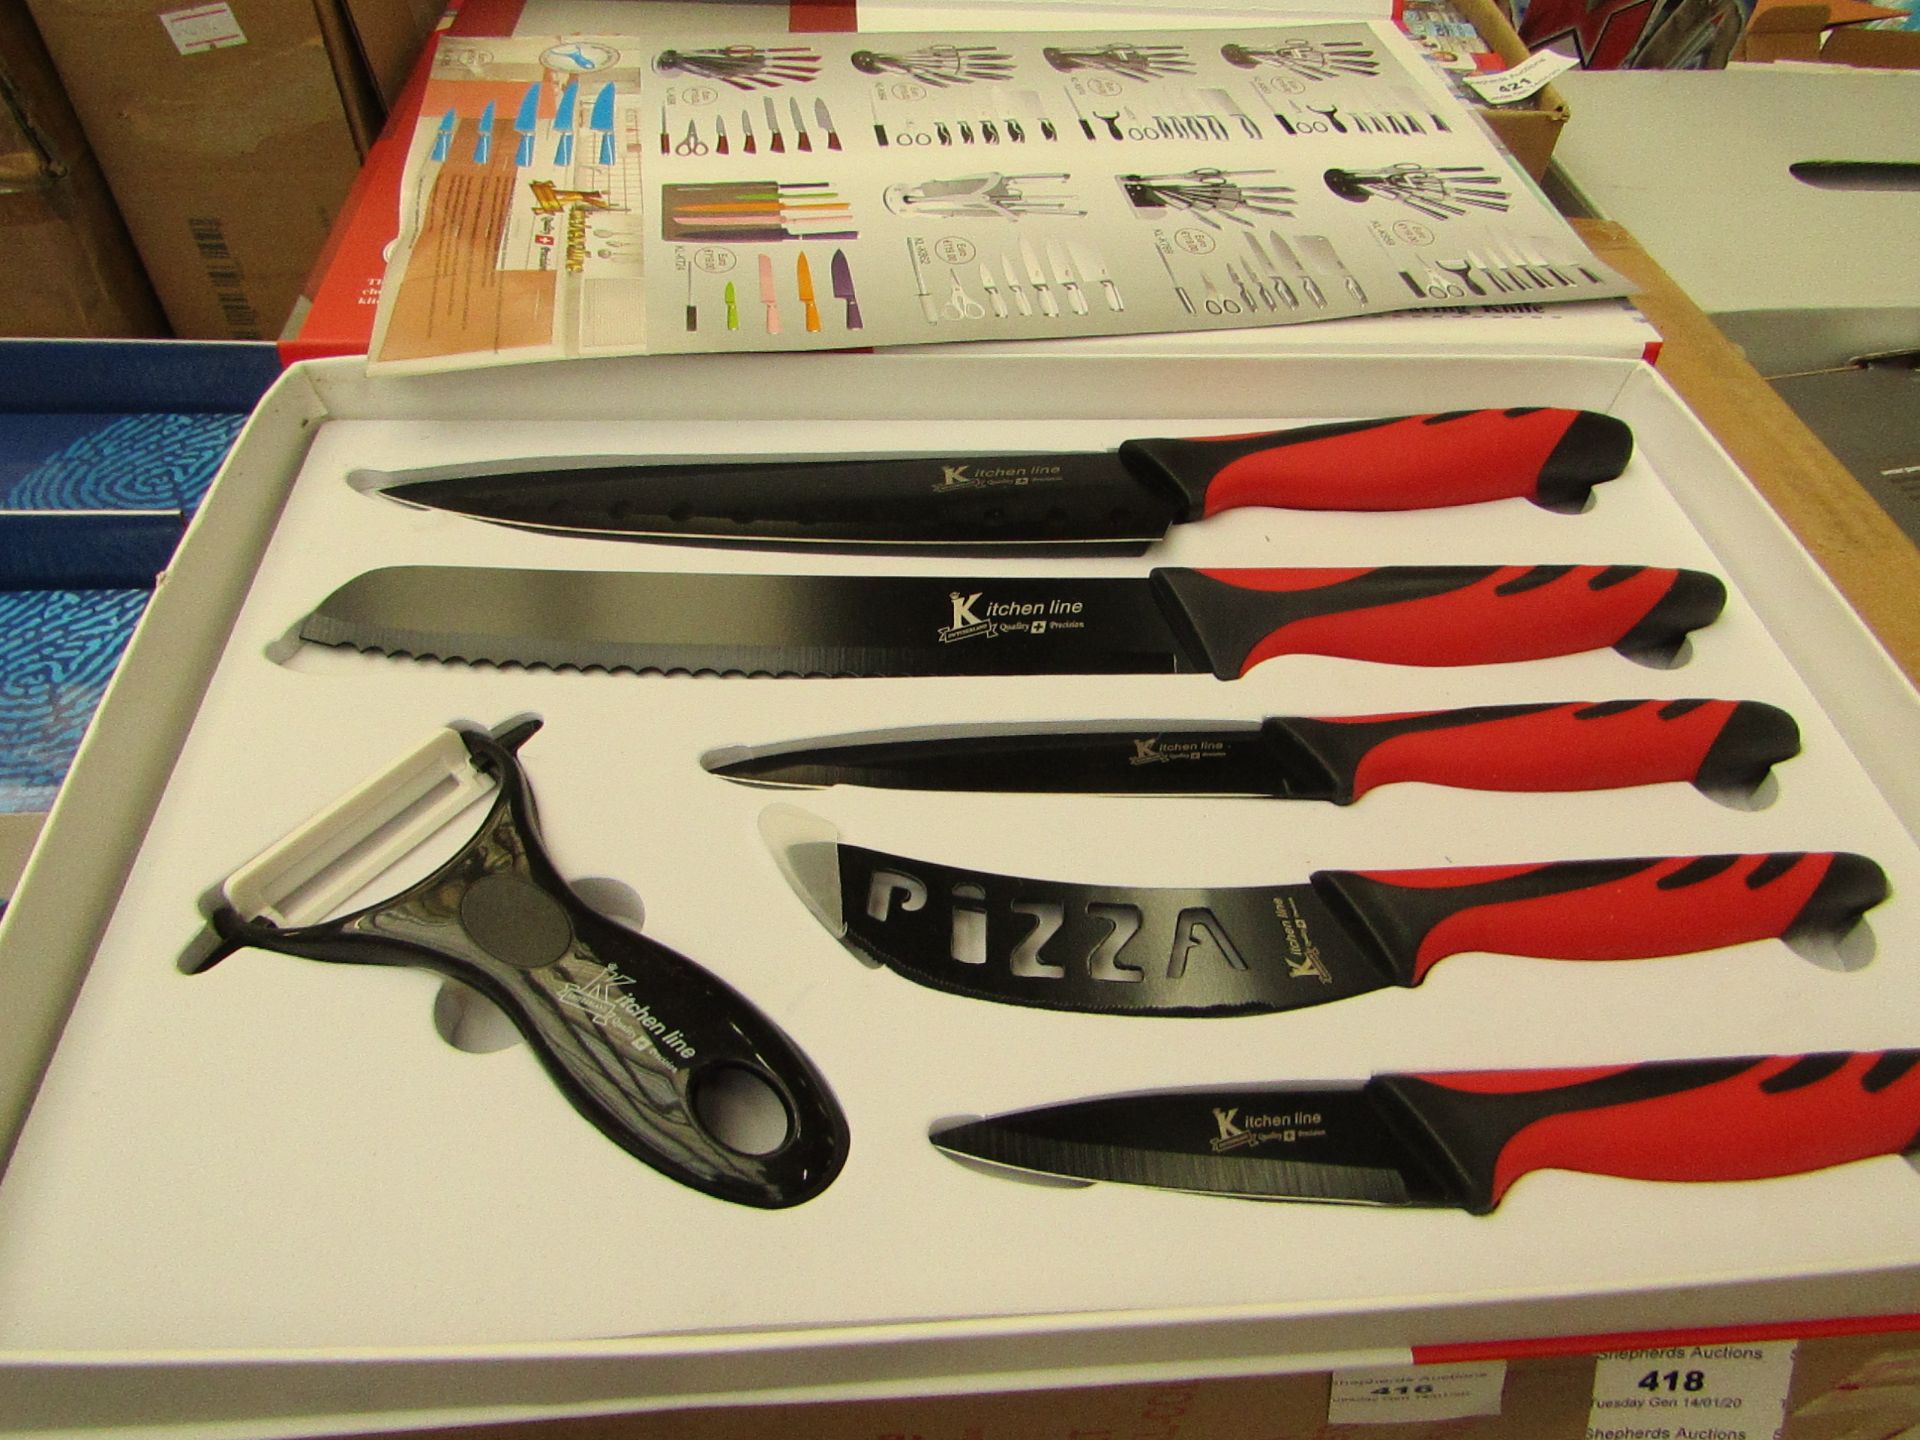 Kitchen Line 6 piece knife set, new and boxed.